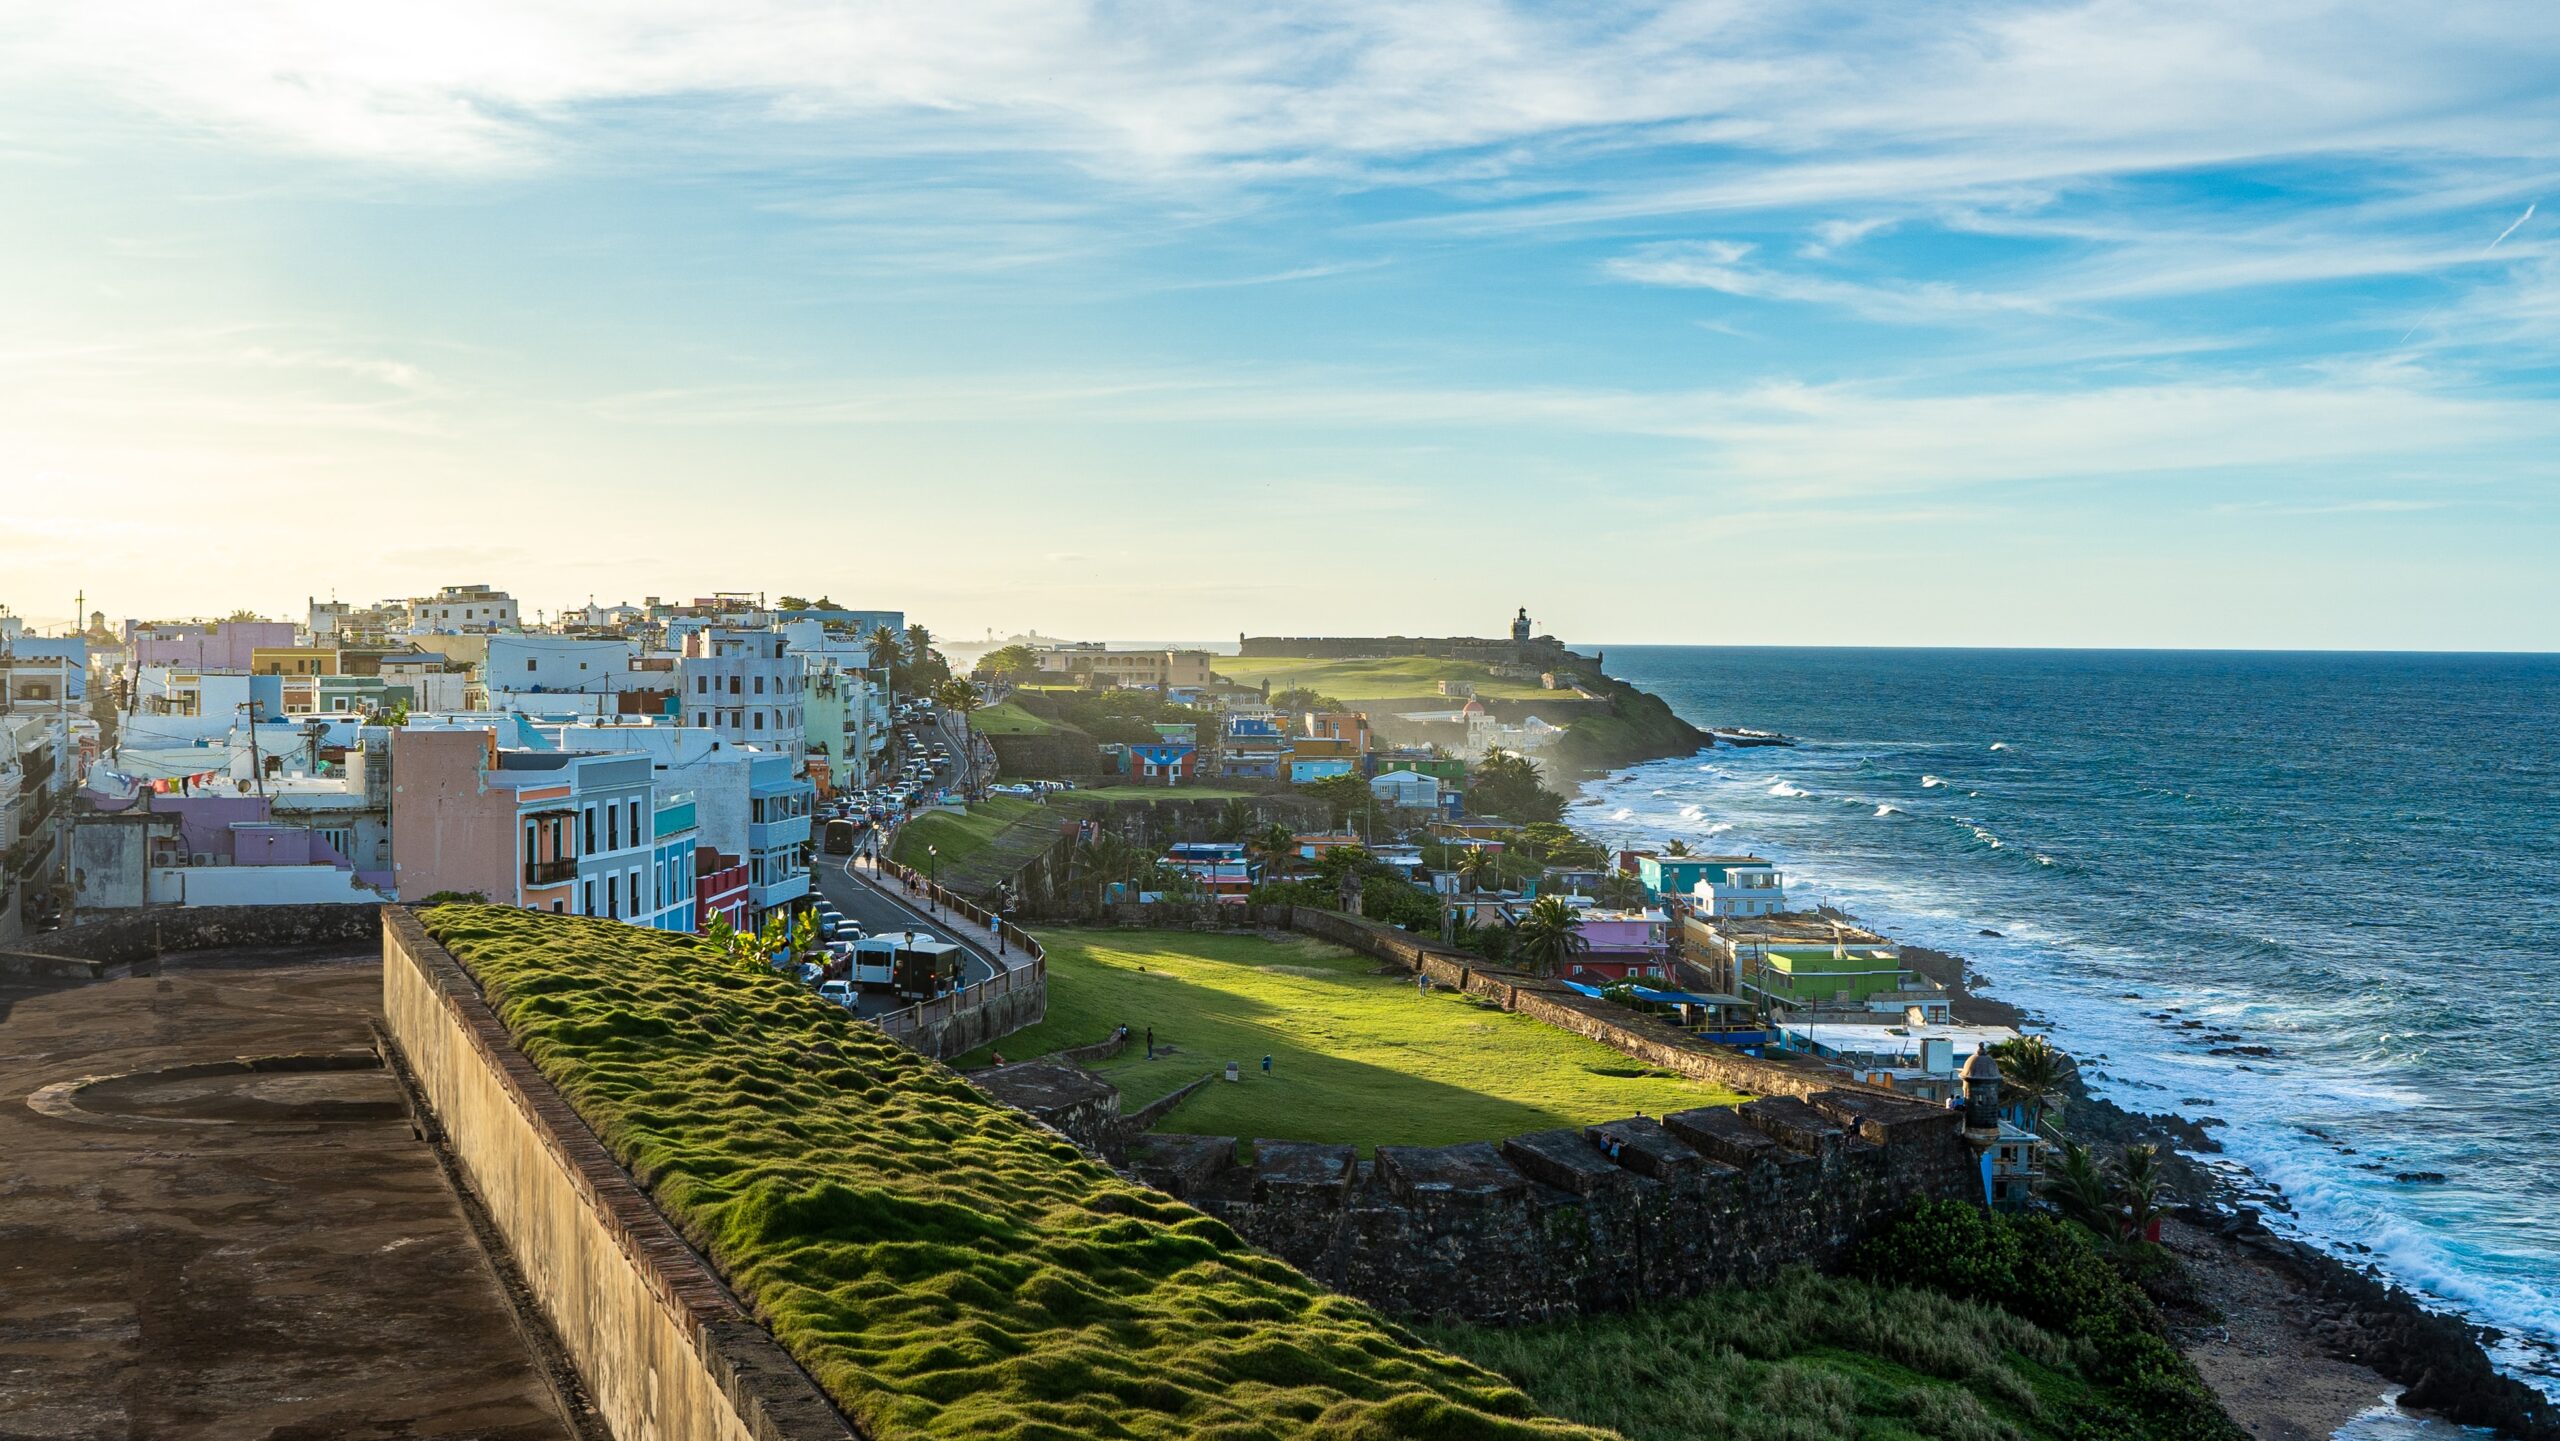 Puerto Rico is a generally safe destination but here are ways for travelers to feel more secure. 
pictured: the lush green coast of Puerto Rico with crashing waves on the beach 